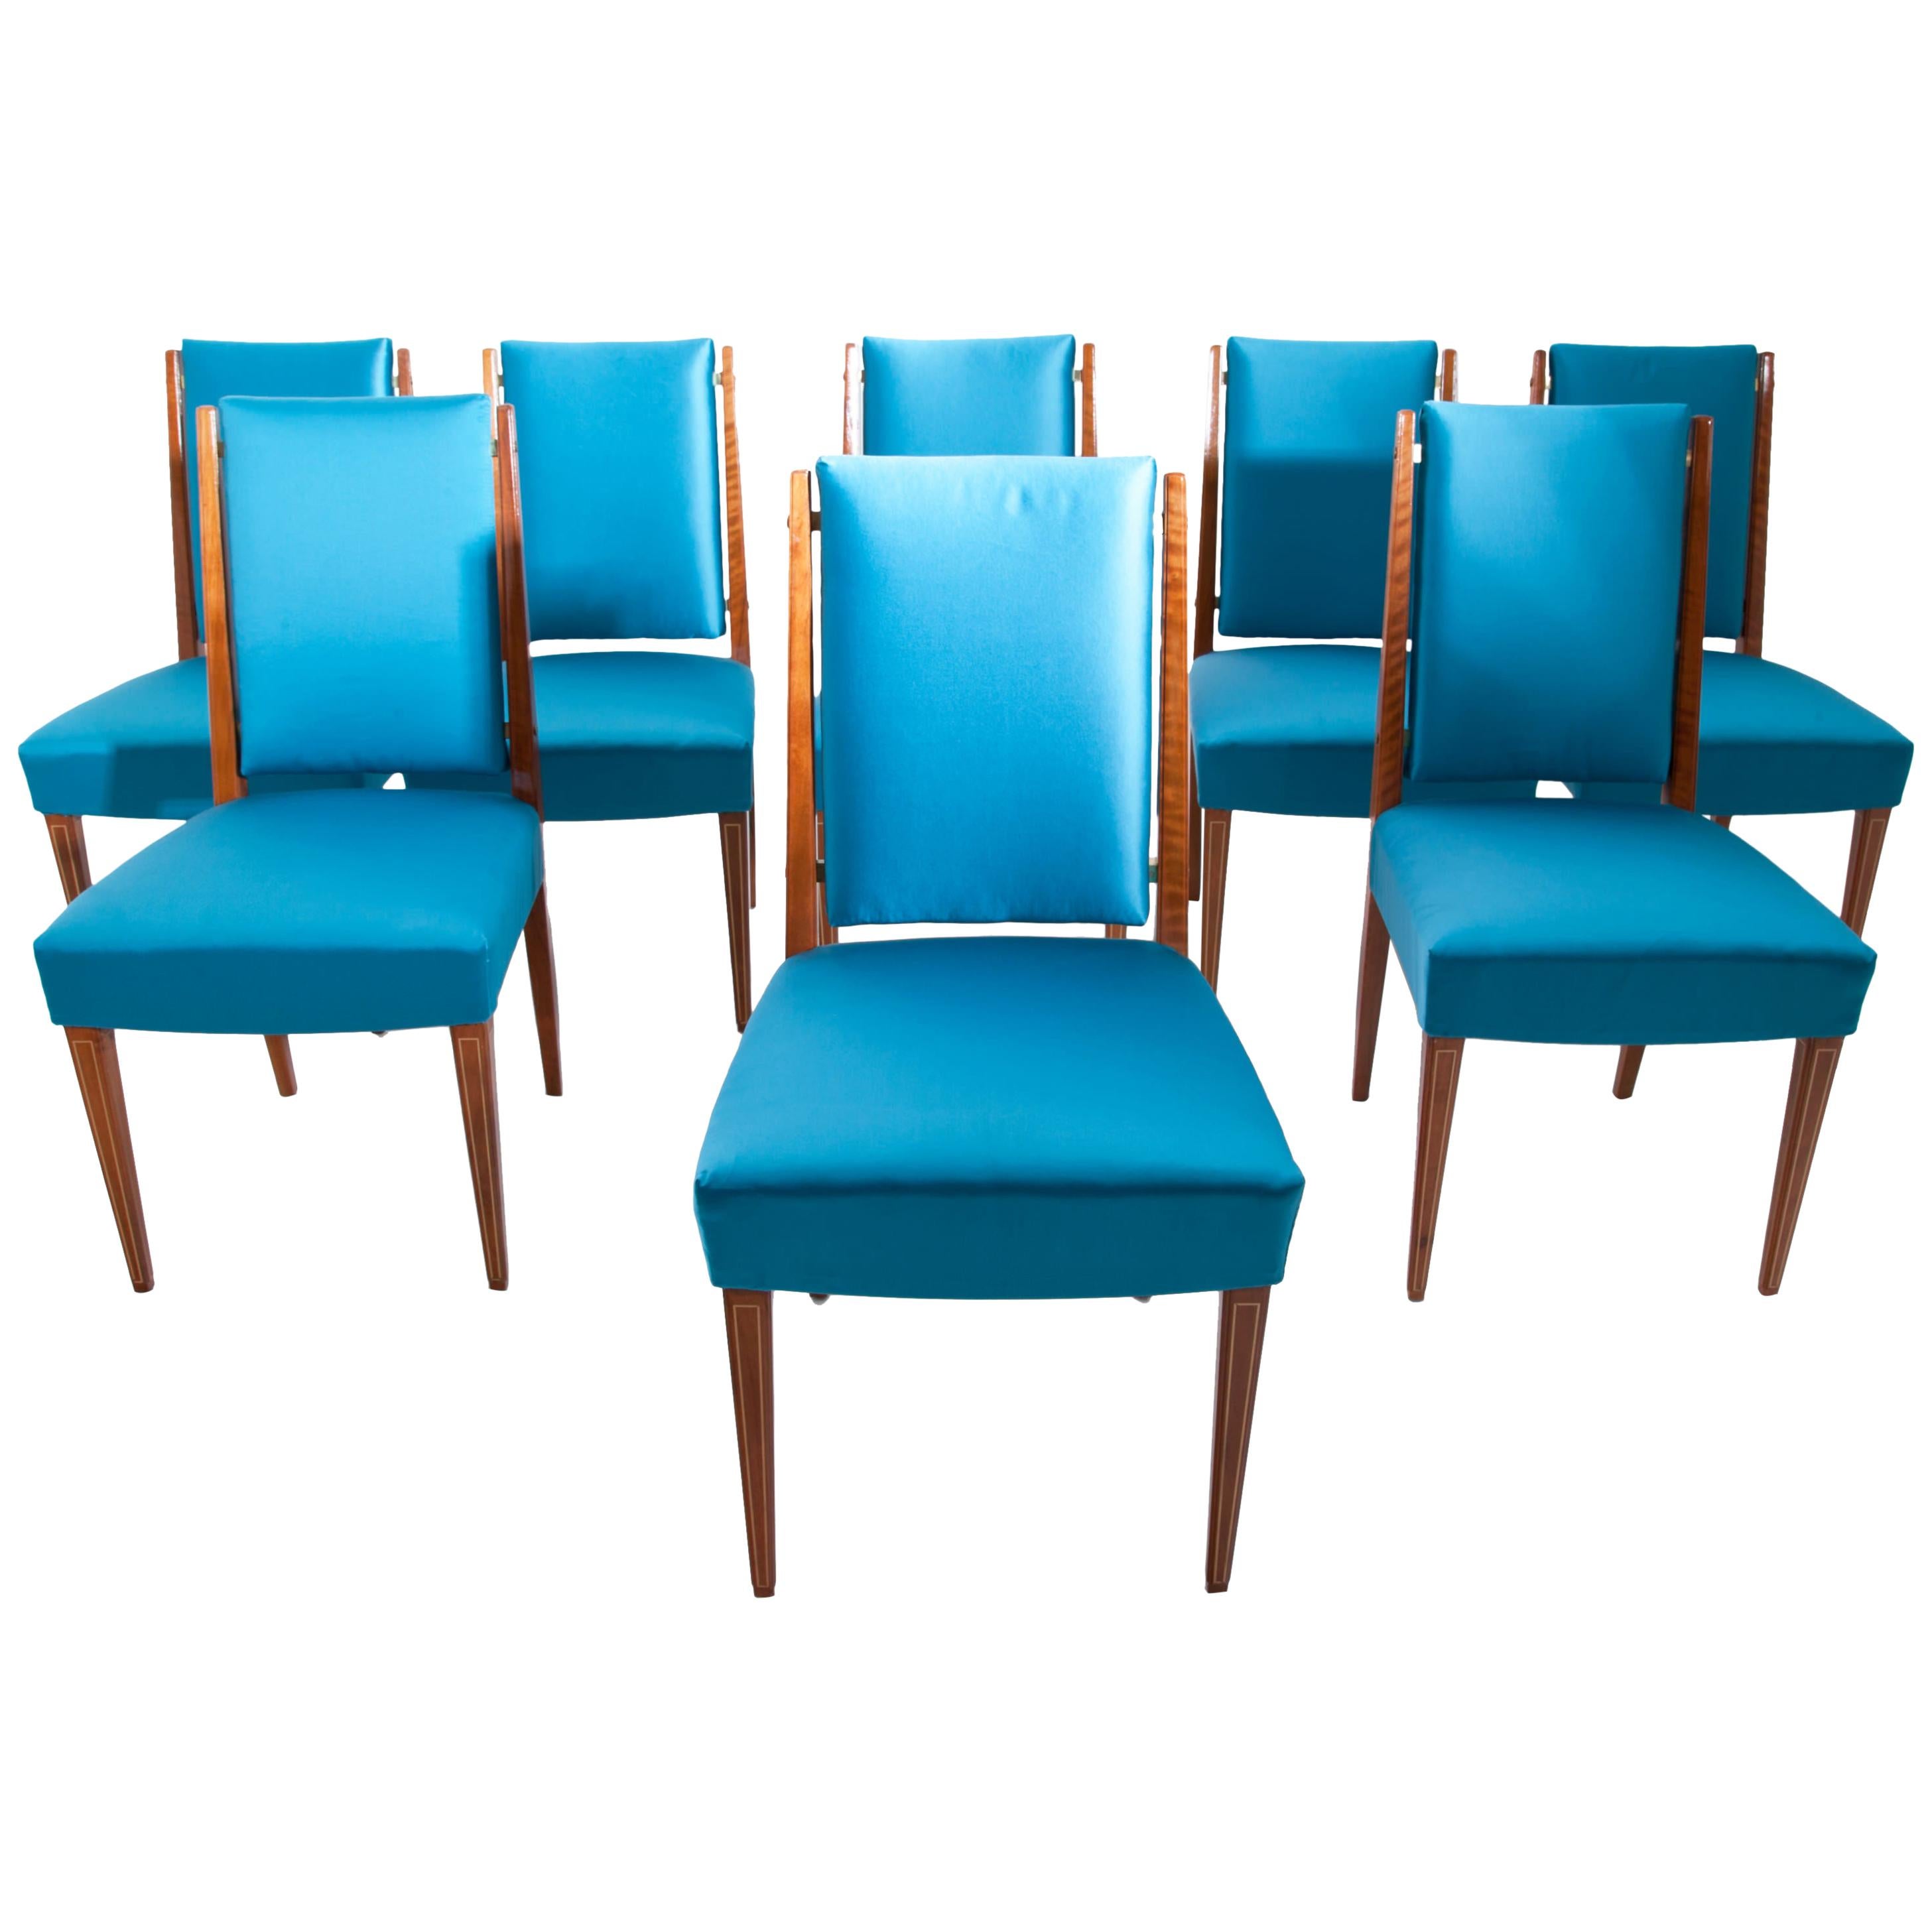 Set of Eight Dining Room Chairs, France, Mid-20th Century